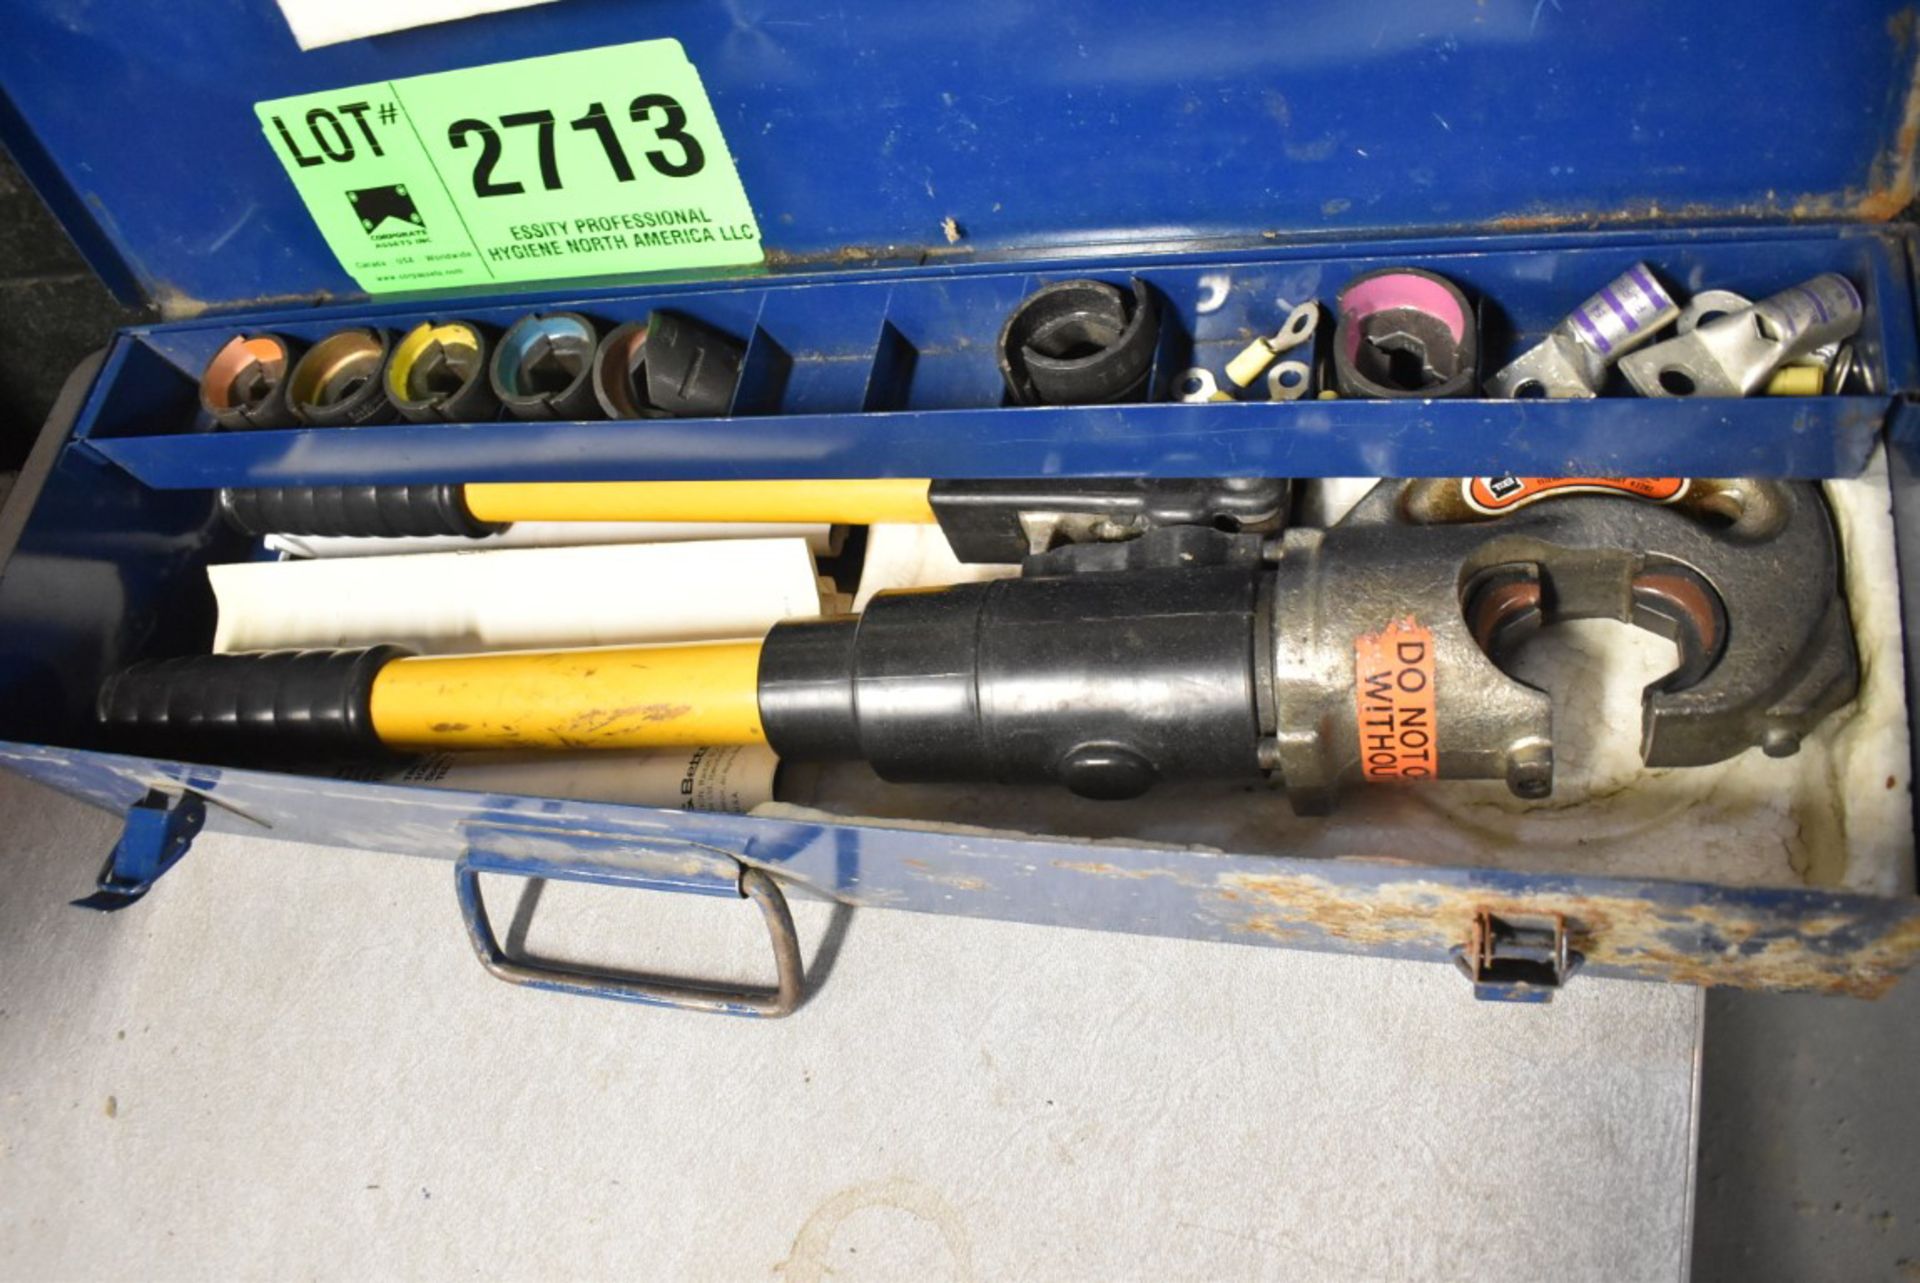 T&B TBM12M MANUAL HYDRAULIC CRIMPER [RIGGING FEES FOR LOT #2713 - $25 USD PLUS APPLICABLE TAXES] - Image 2 of 3